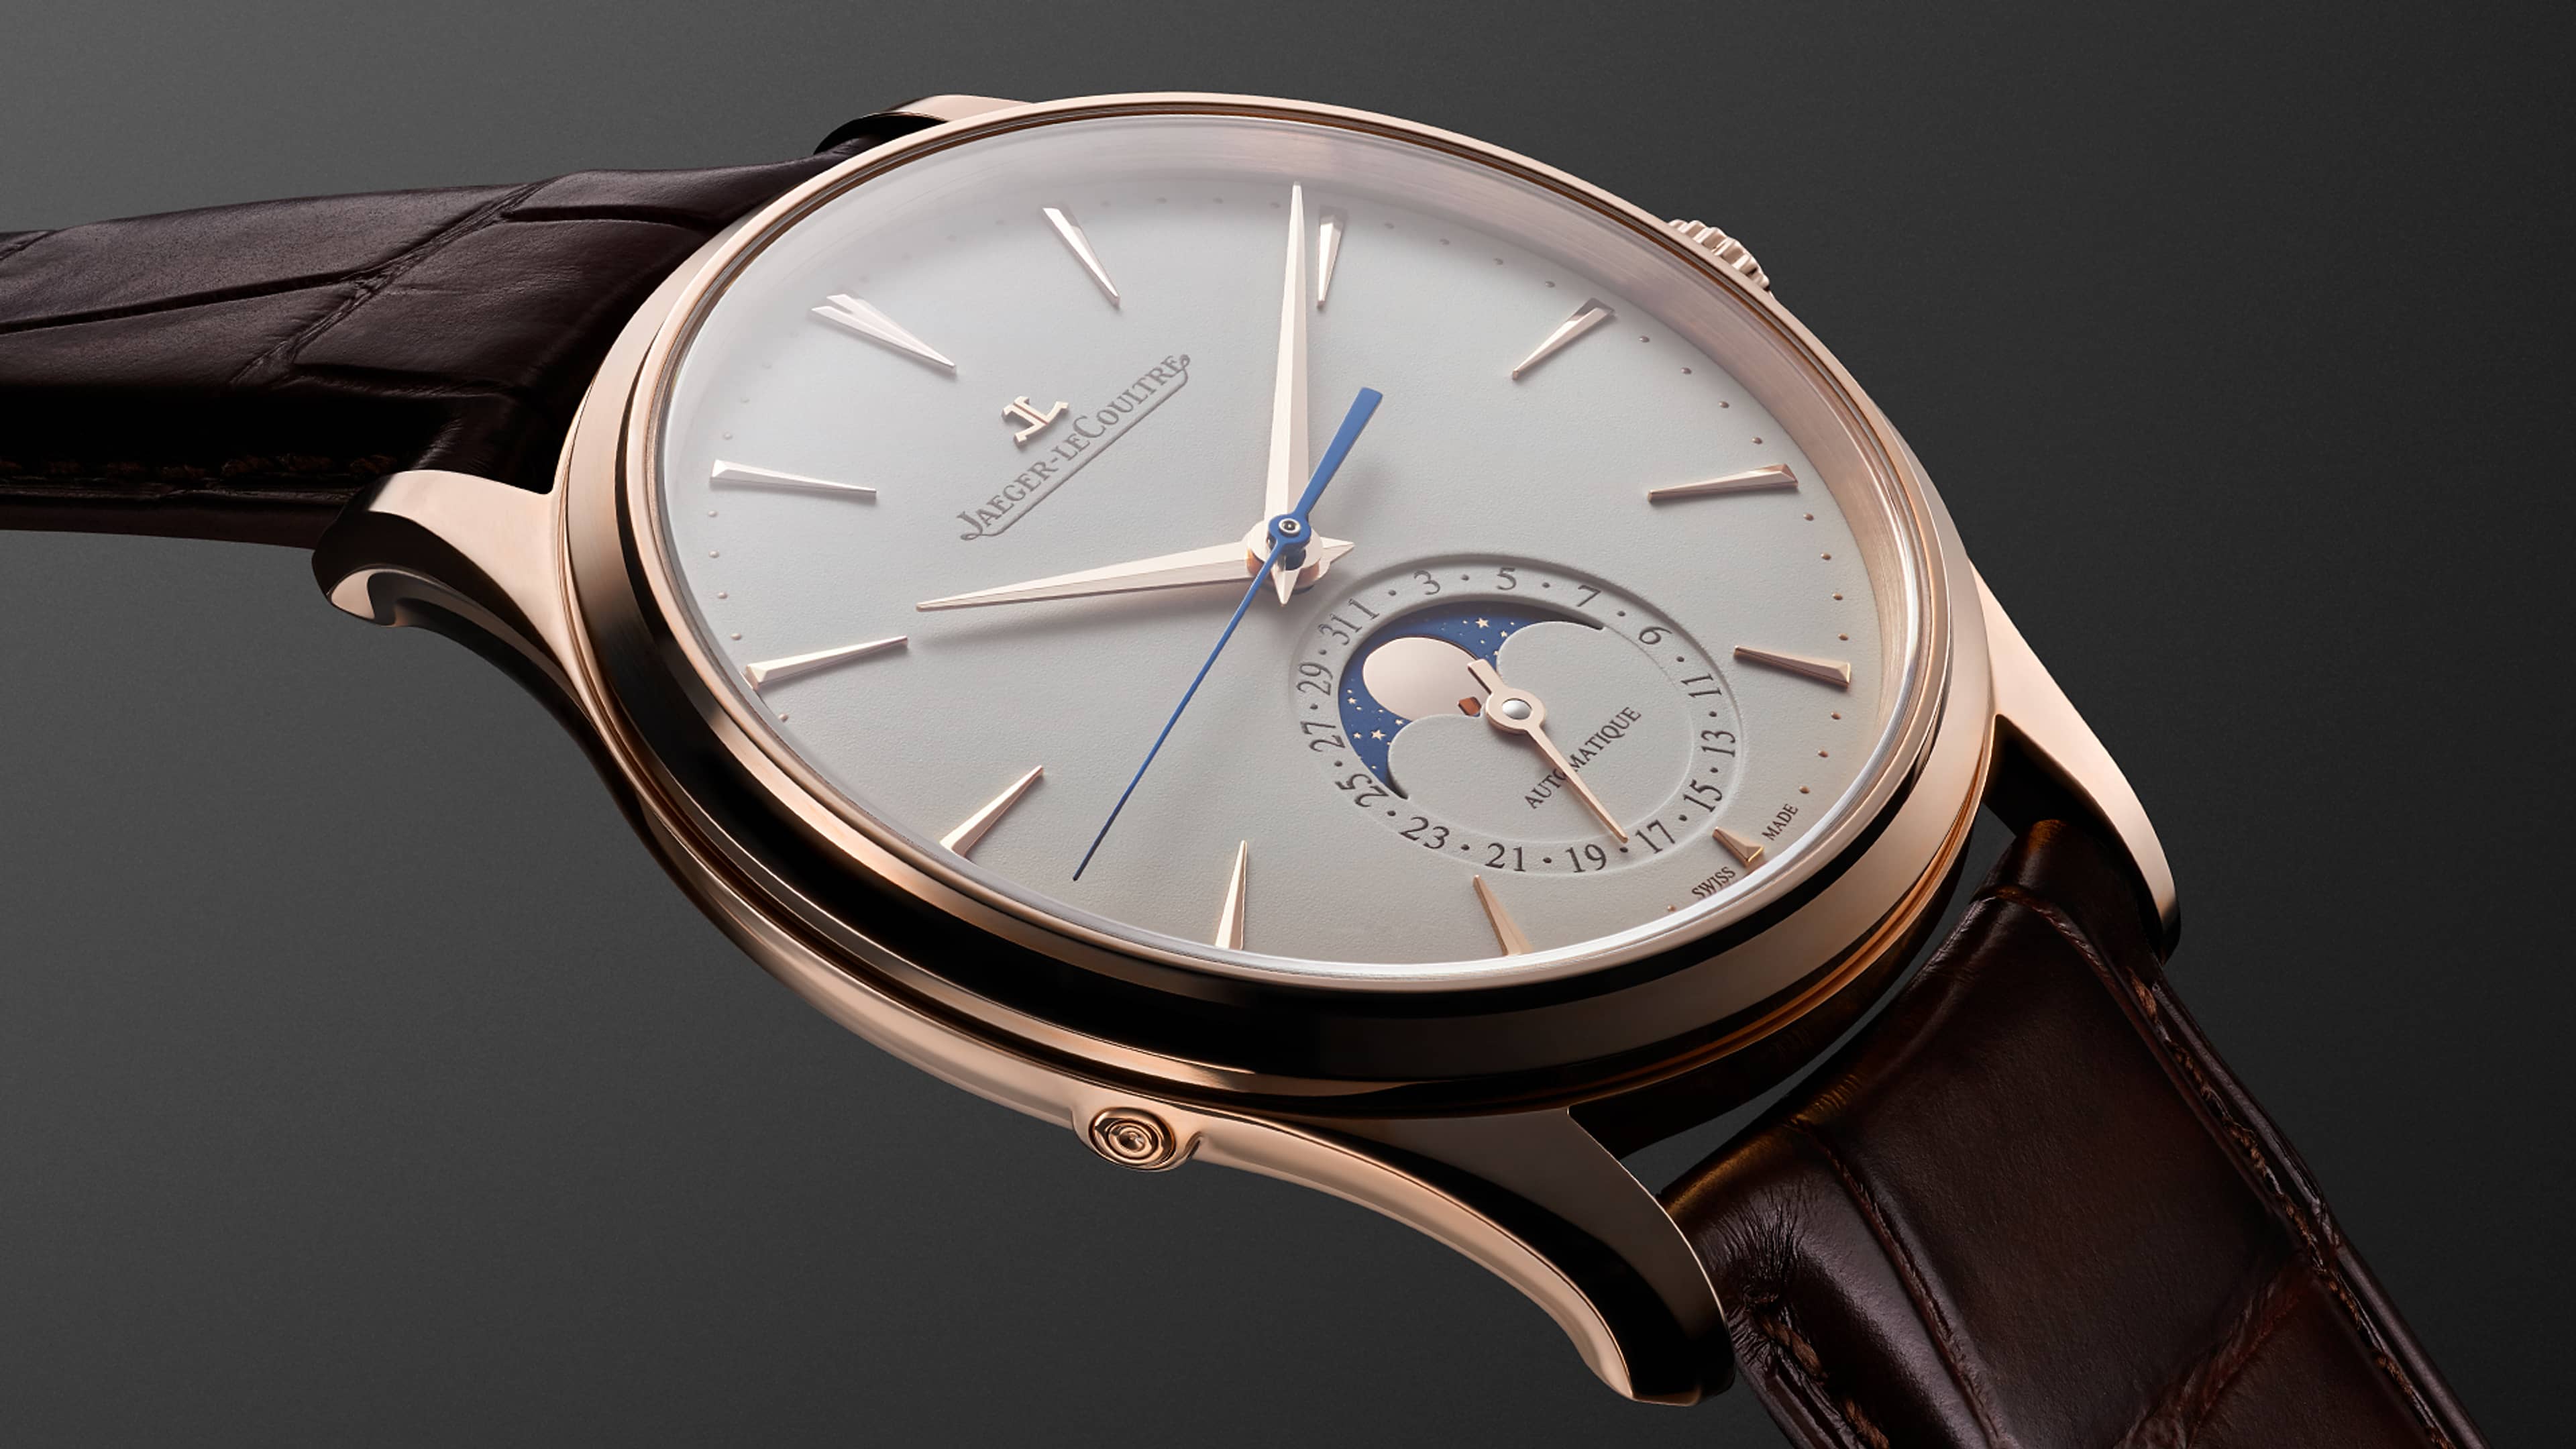 History of the Master Ultra Thin Watches